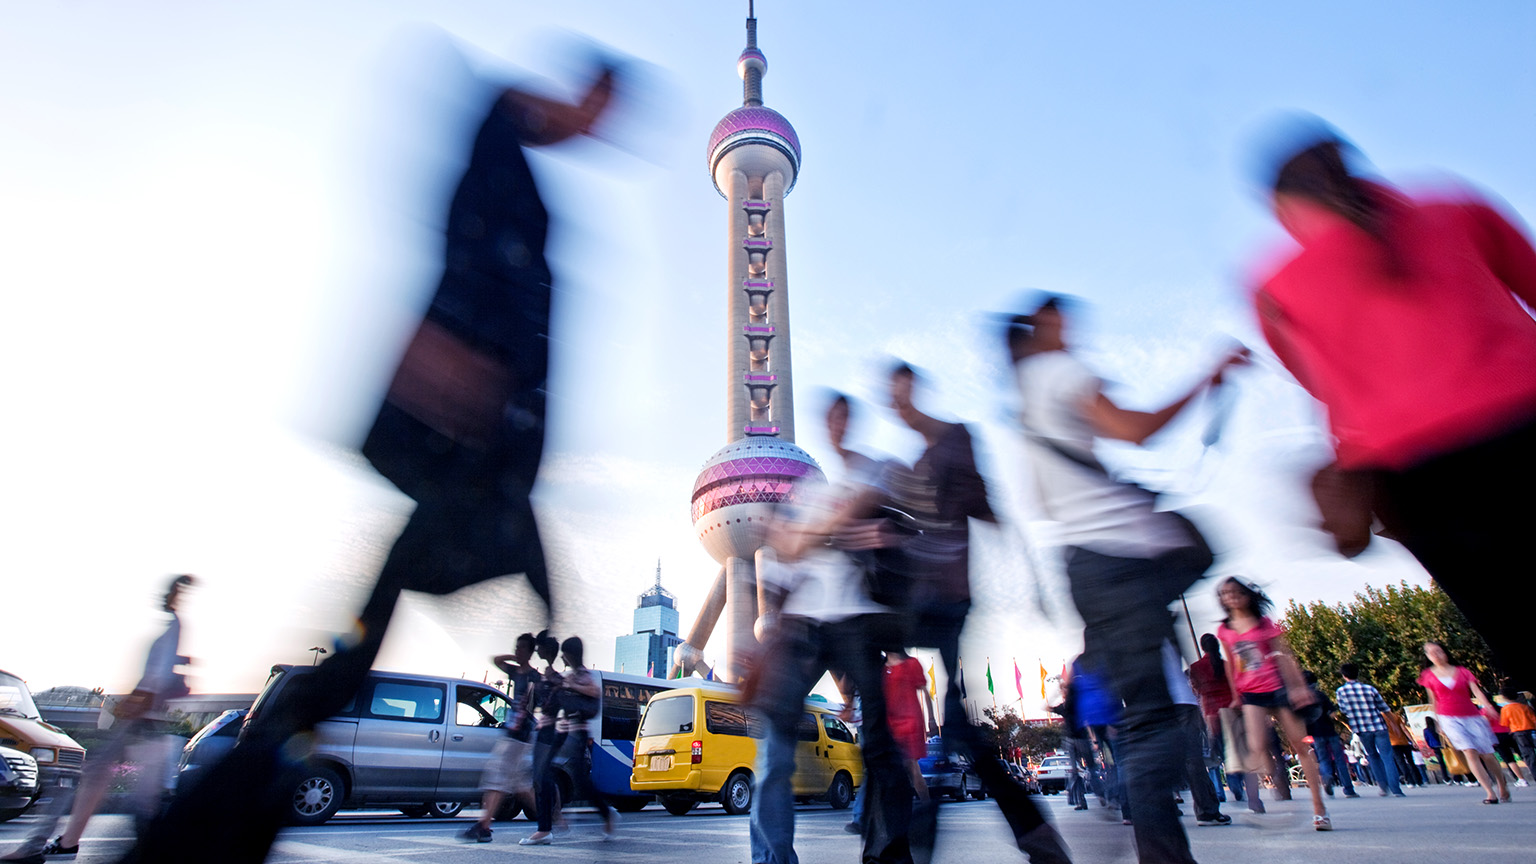 From a low angle, pedestrians are seen hurrying by with the Shanghai Oriental Pearl Tower standing prominently in the background.